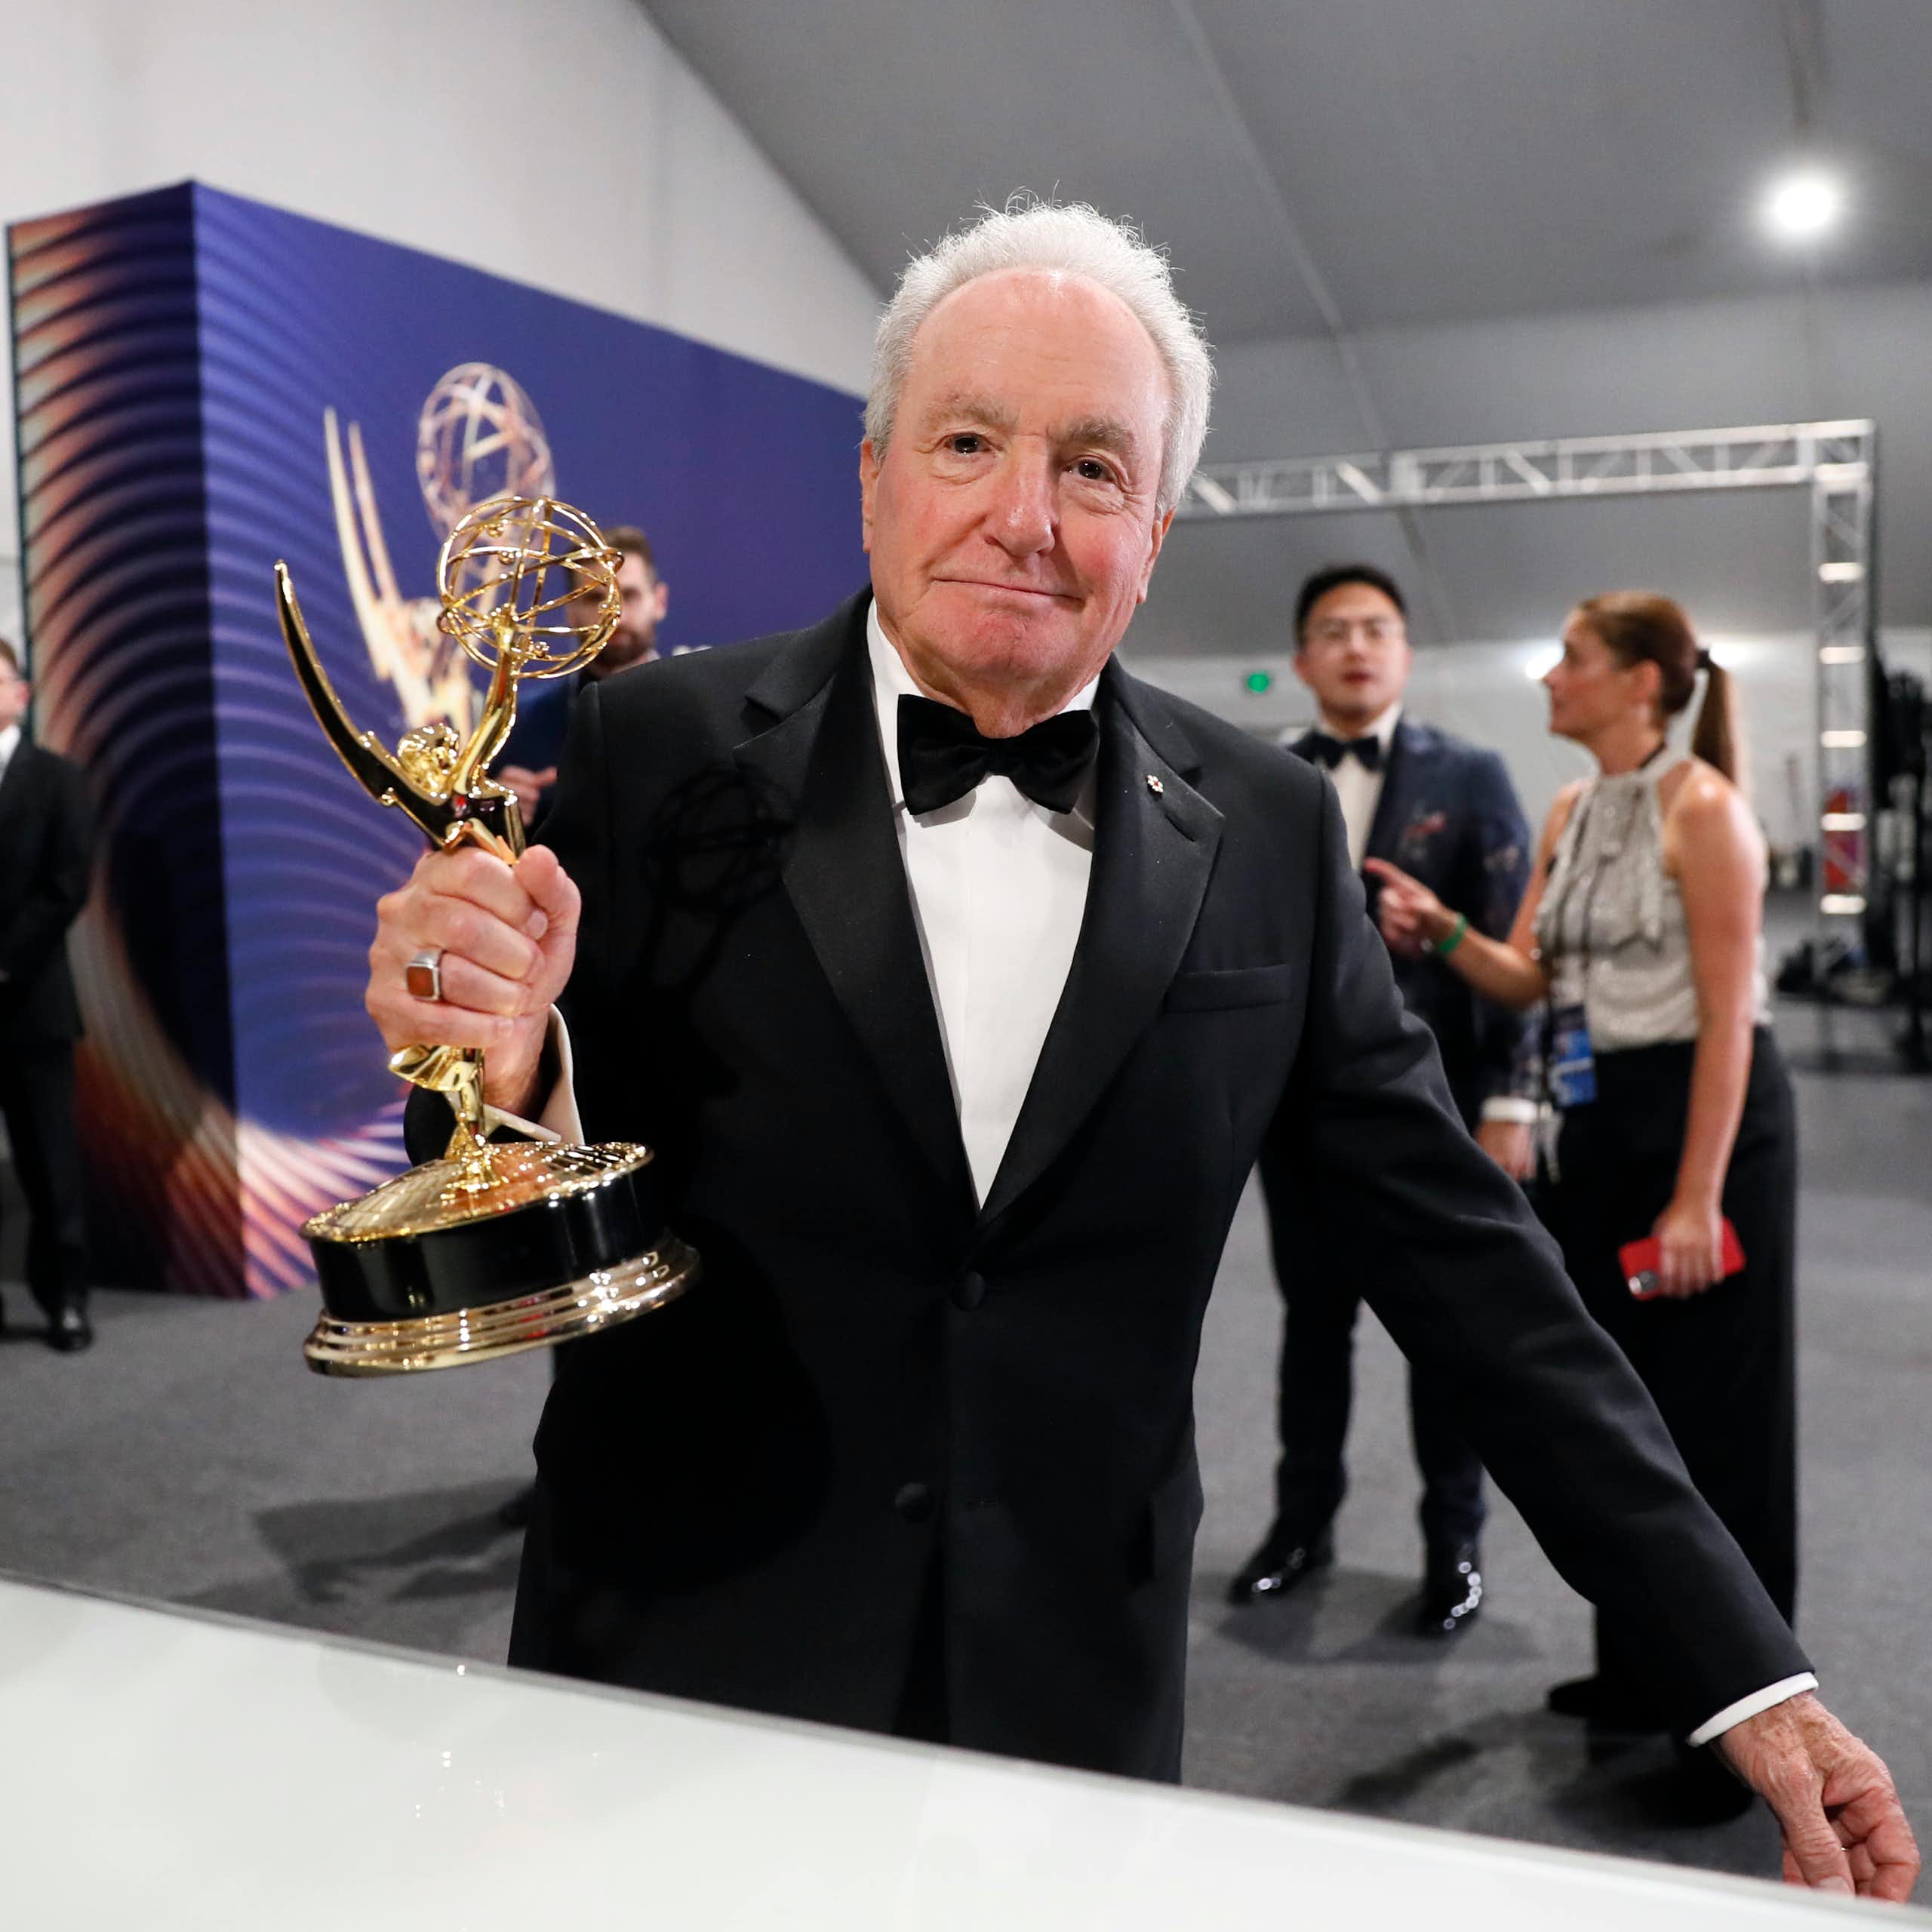 White-haired man in a tuxedo holds an Emmy award